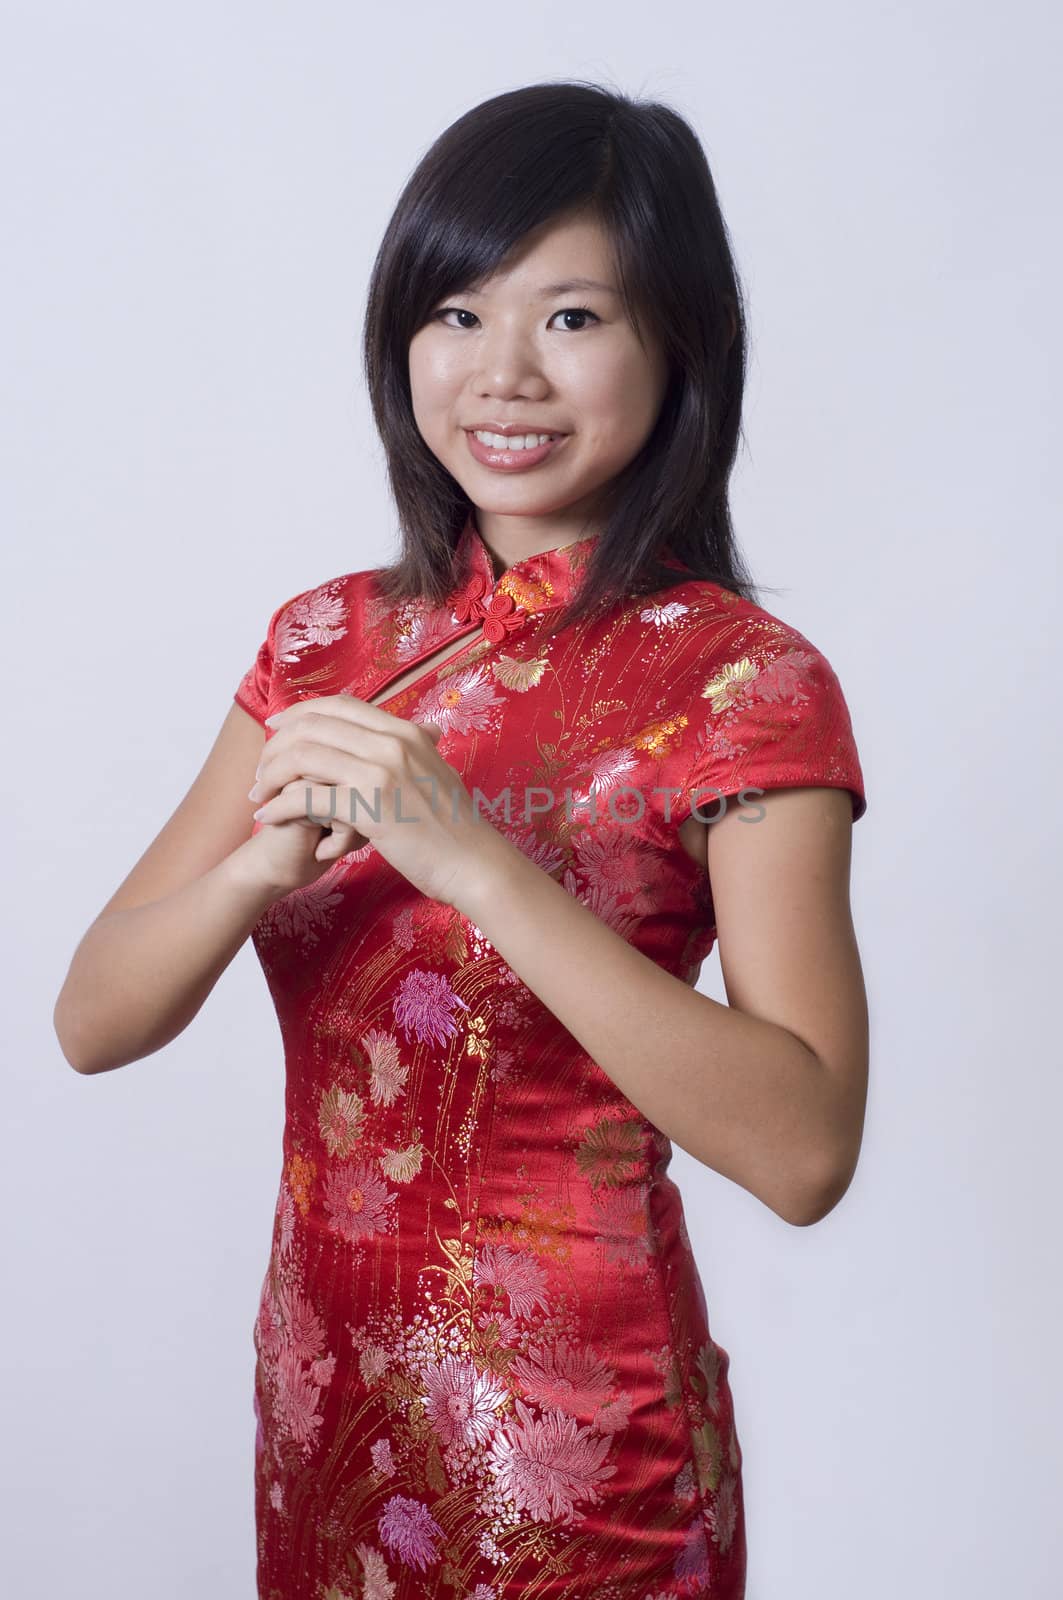 chinese new year girl giving greeting by yuliang11